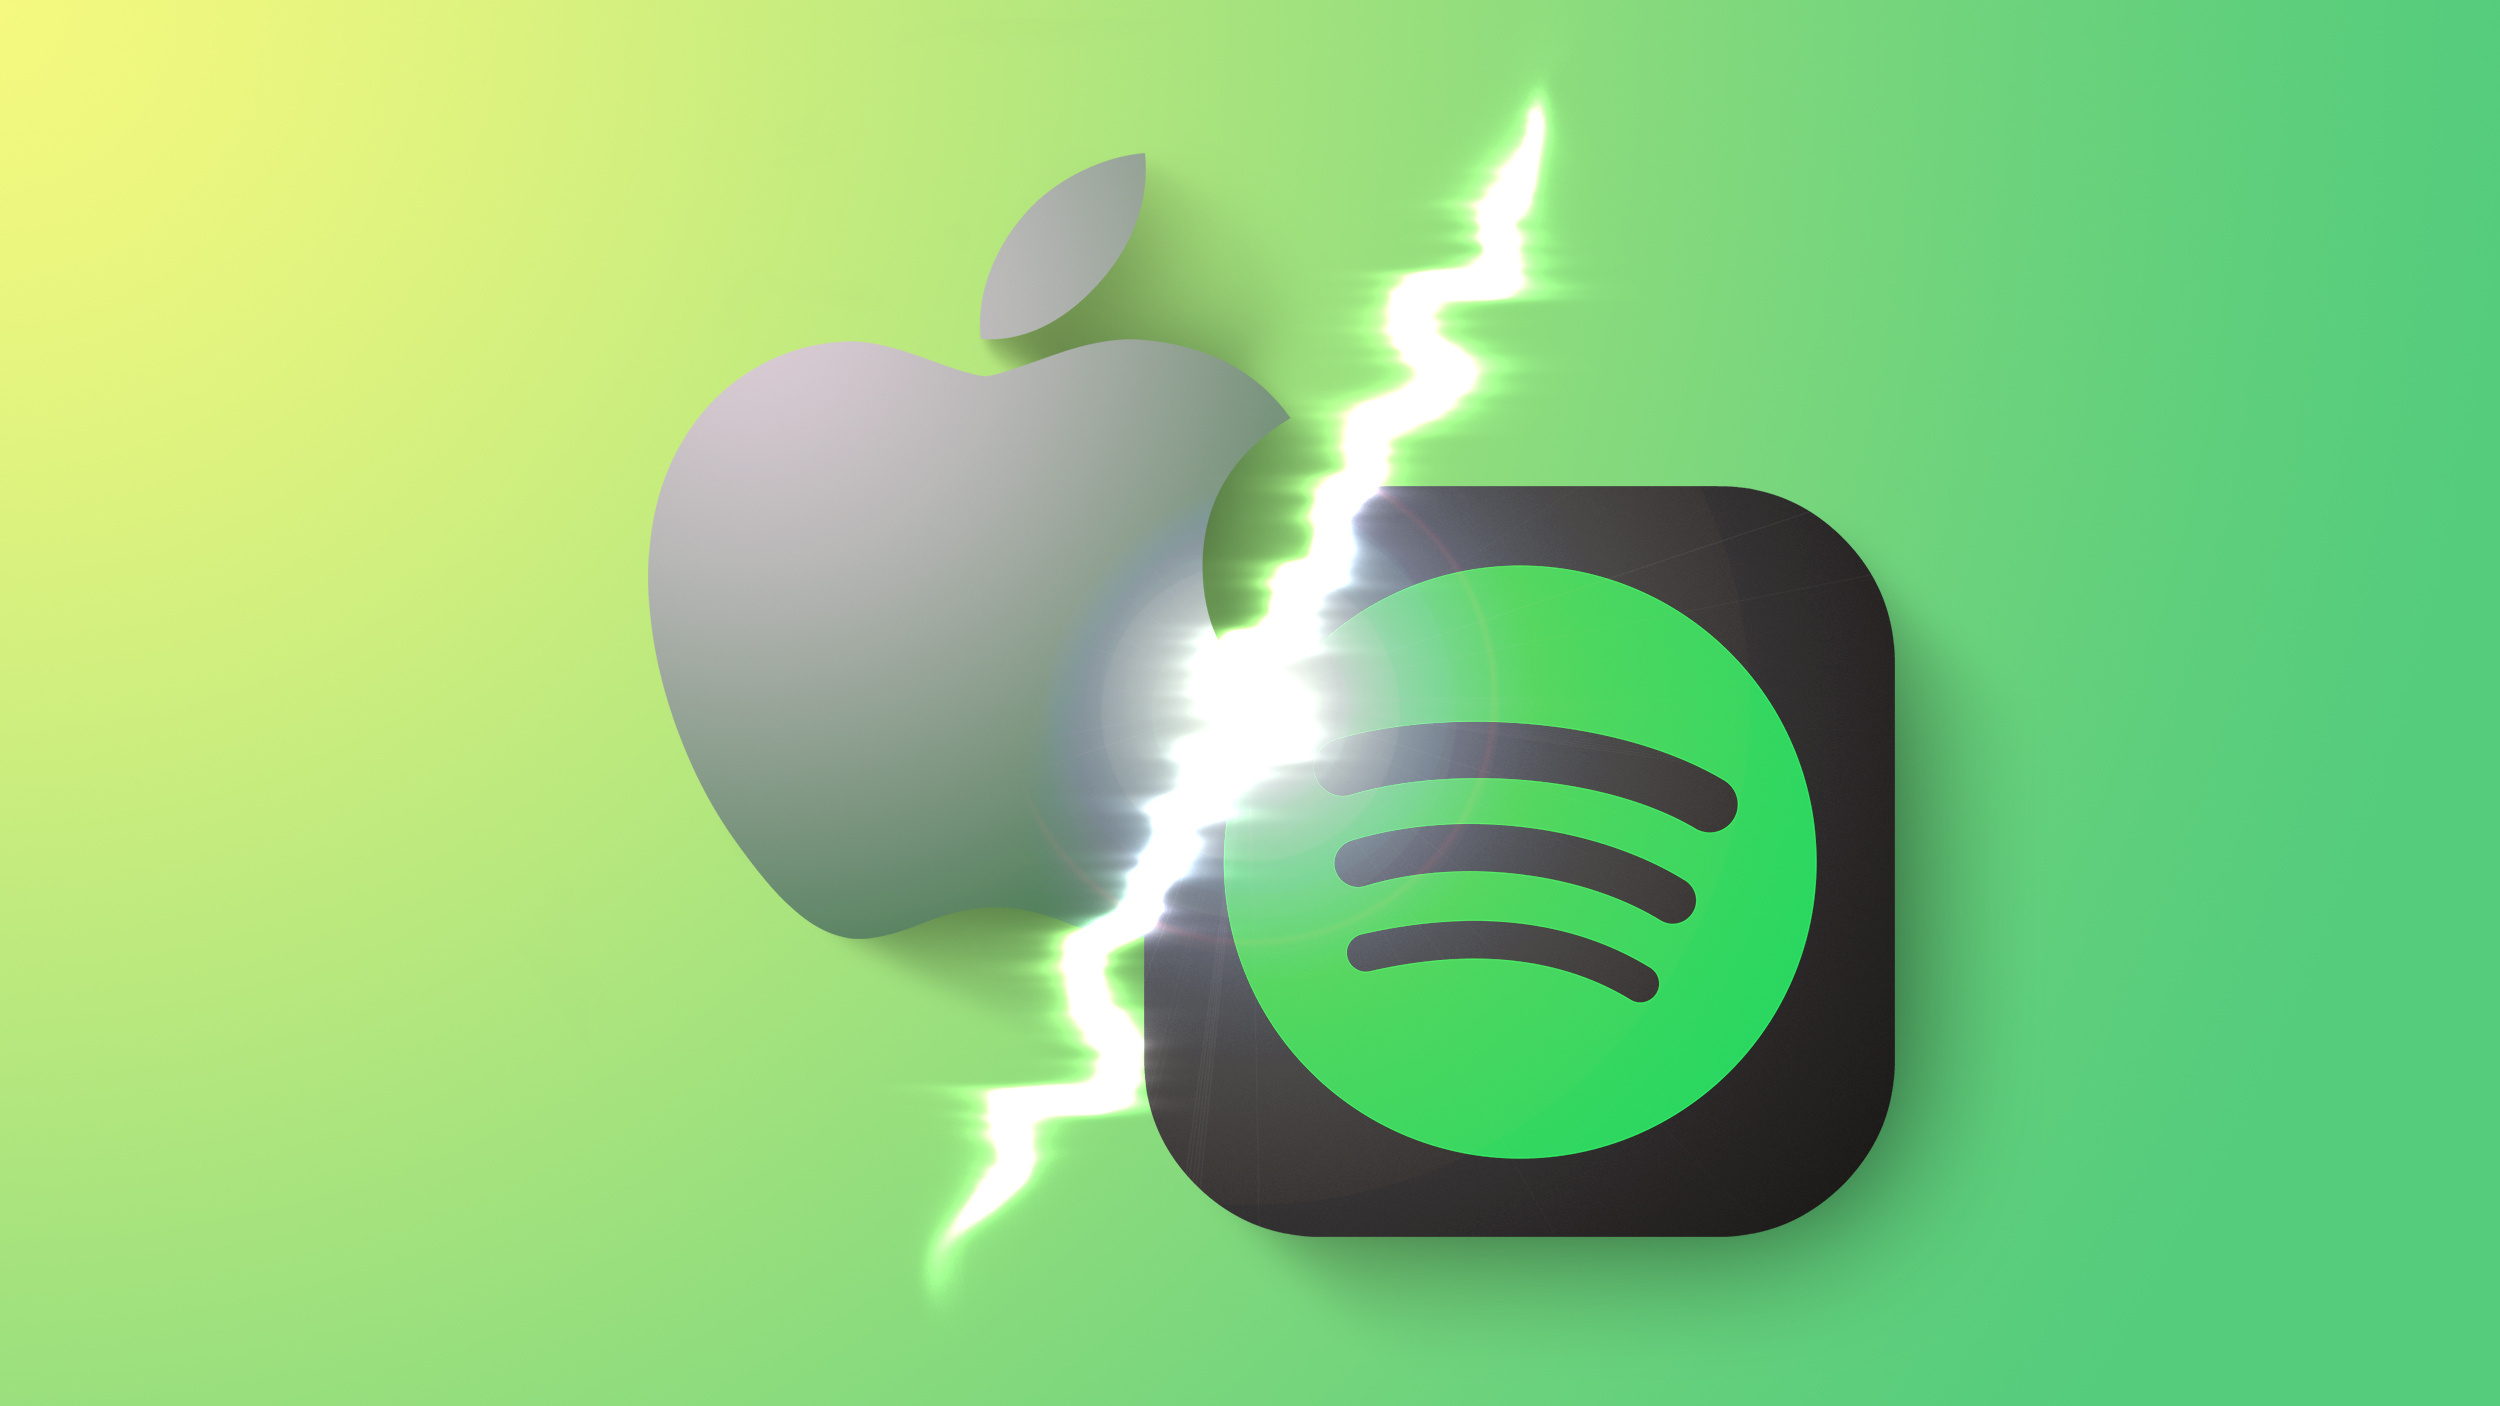 Apple Responds to EU’s Decision to Narrow Antitrust Case Prompted by Spotify